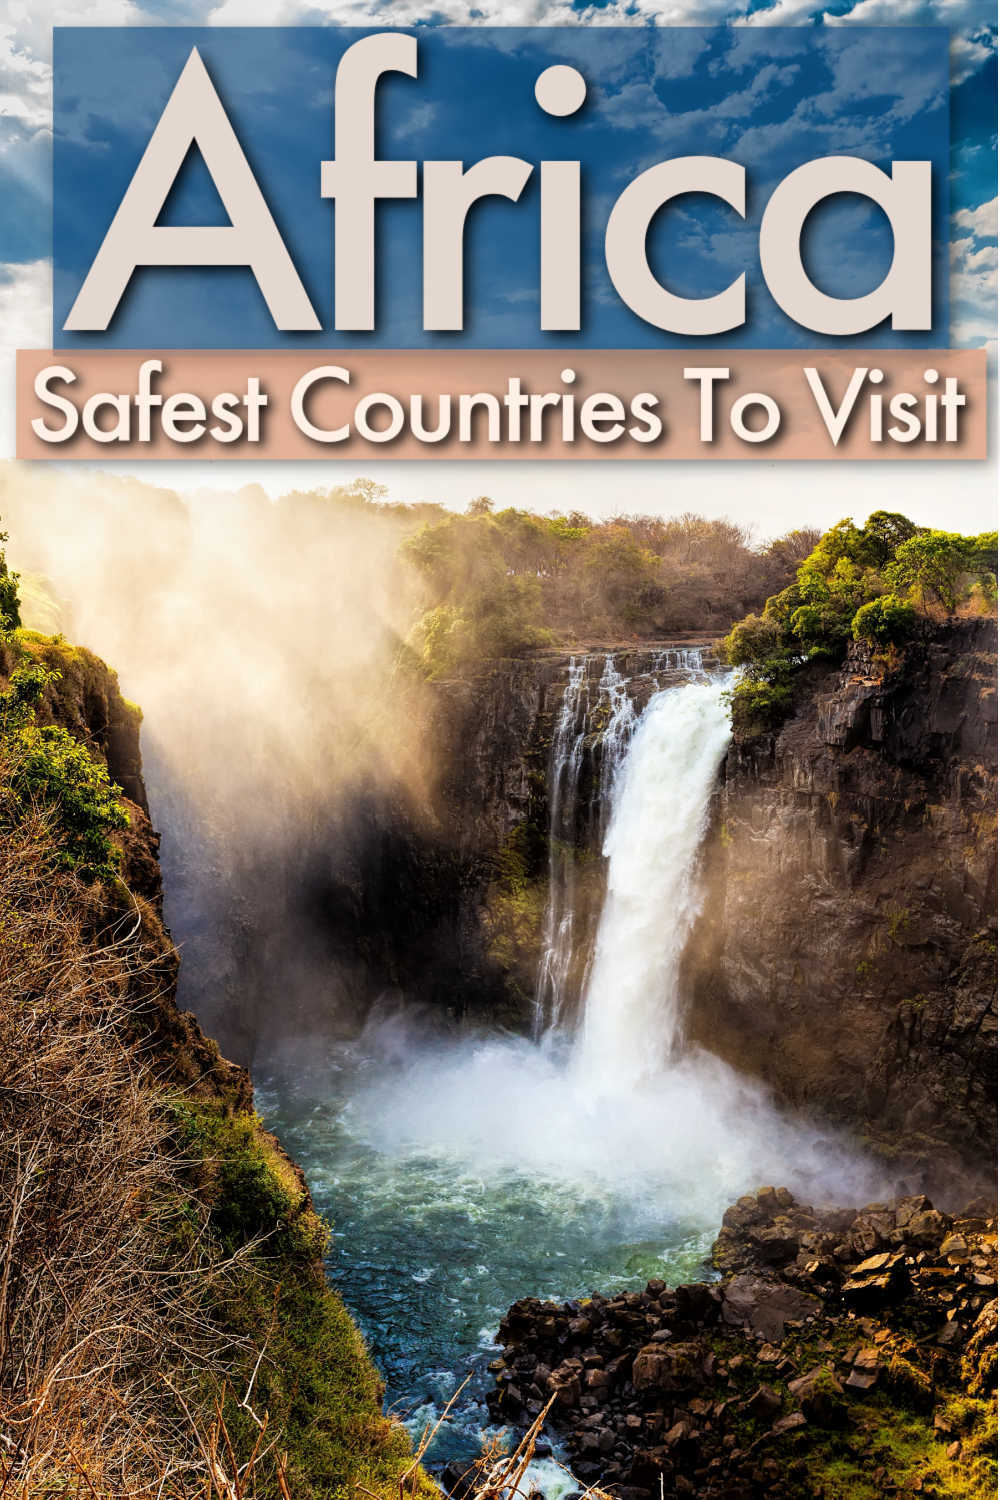 Here are the 10 Safest Countries in Africa to travel to, according to the GPI (Global Peace Index).You will be surprised that many African countries are safer than European and American destinations. More than just listing the safest African countries to visit, we also give you info about why it’s safe, what dangers you need to be aware of, and most importantly, why you should travel there and what to see and do. Africa safe countries | Best countries in Africa